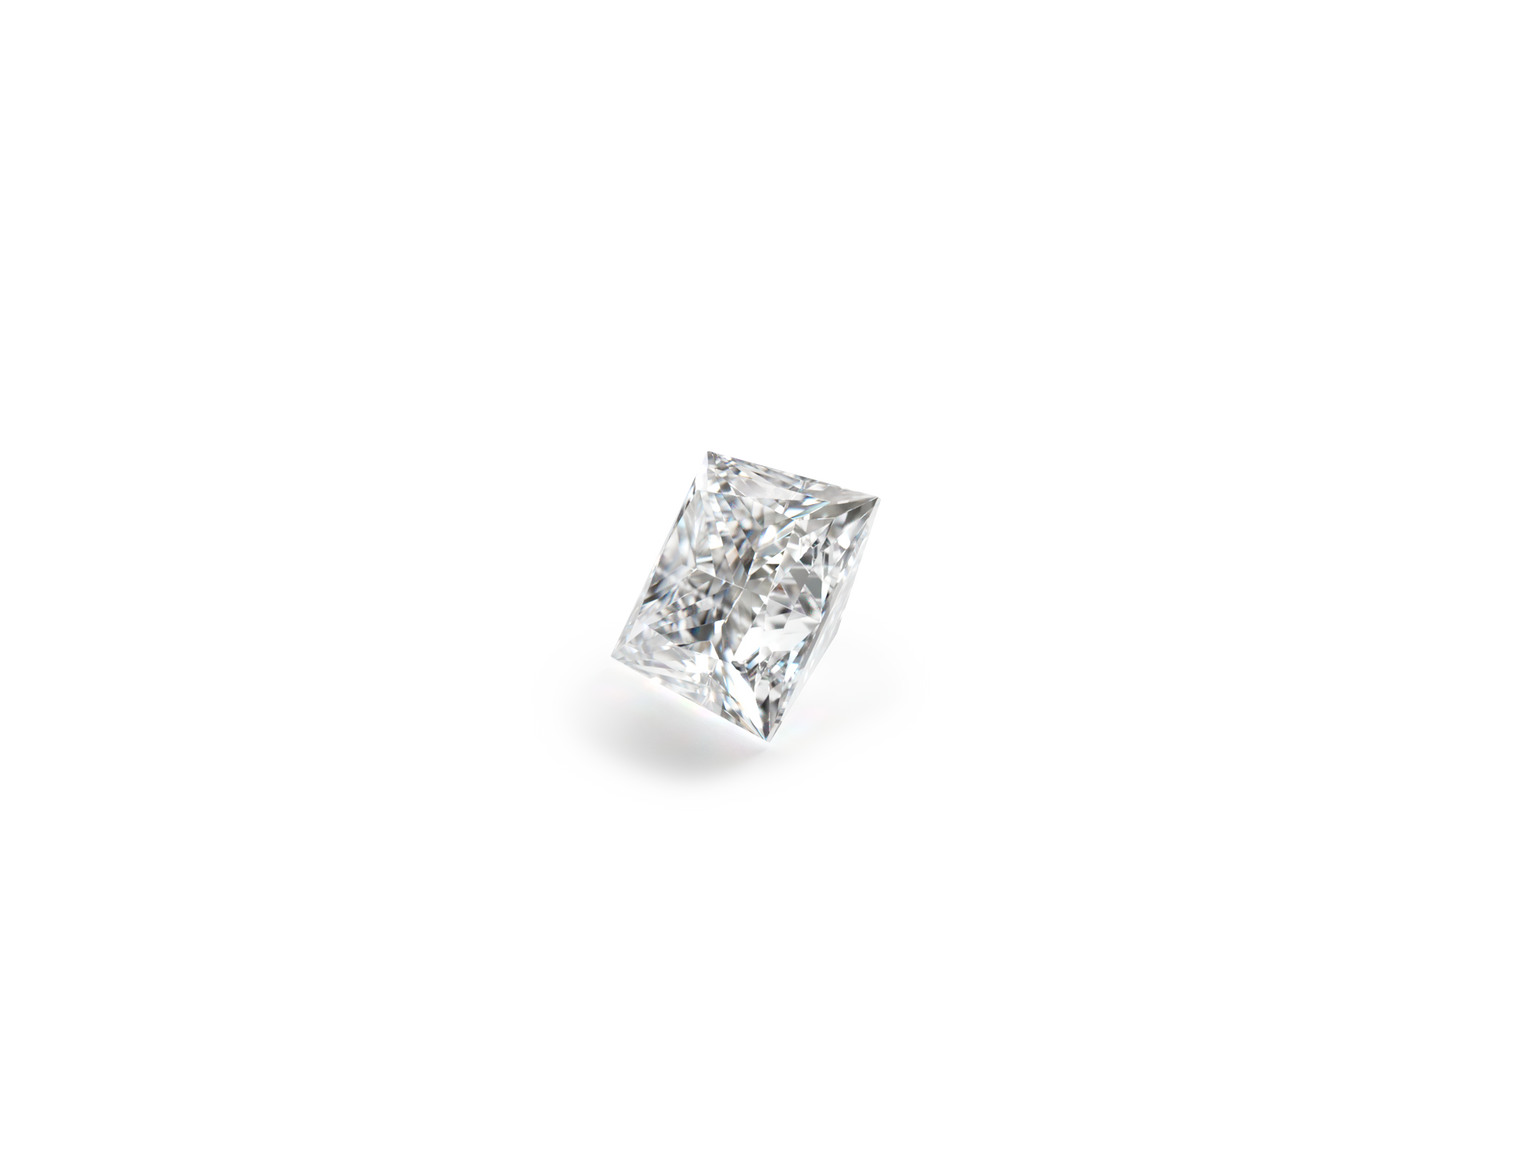 Front view of 1-1/8 carat princess cut diamond in white